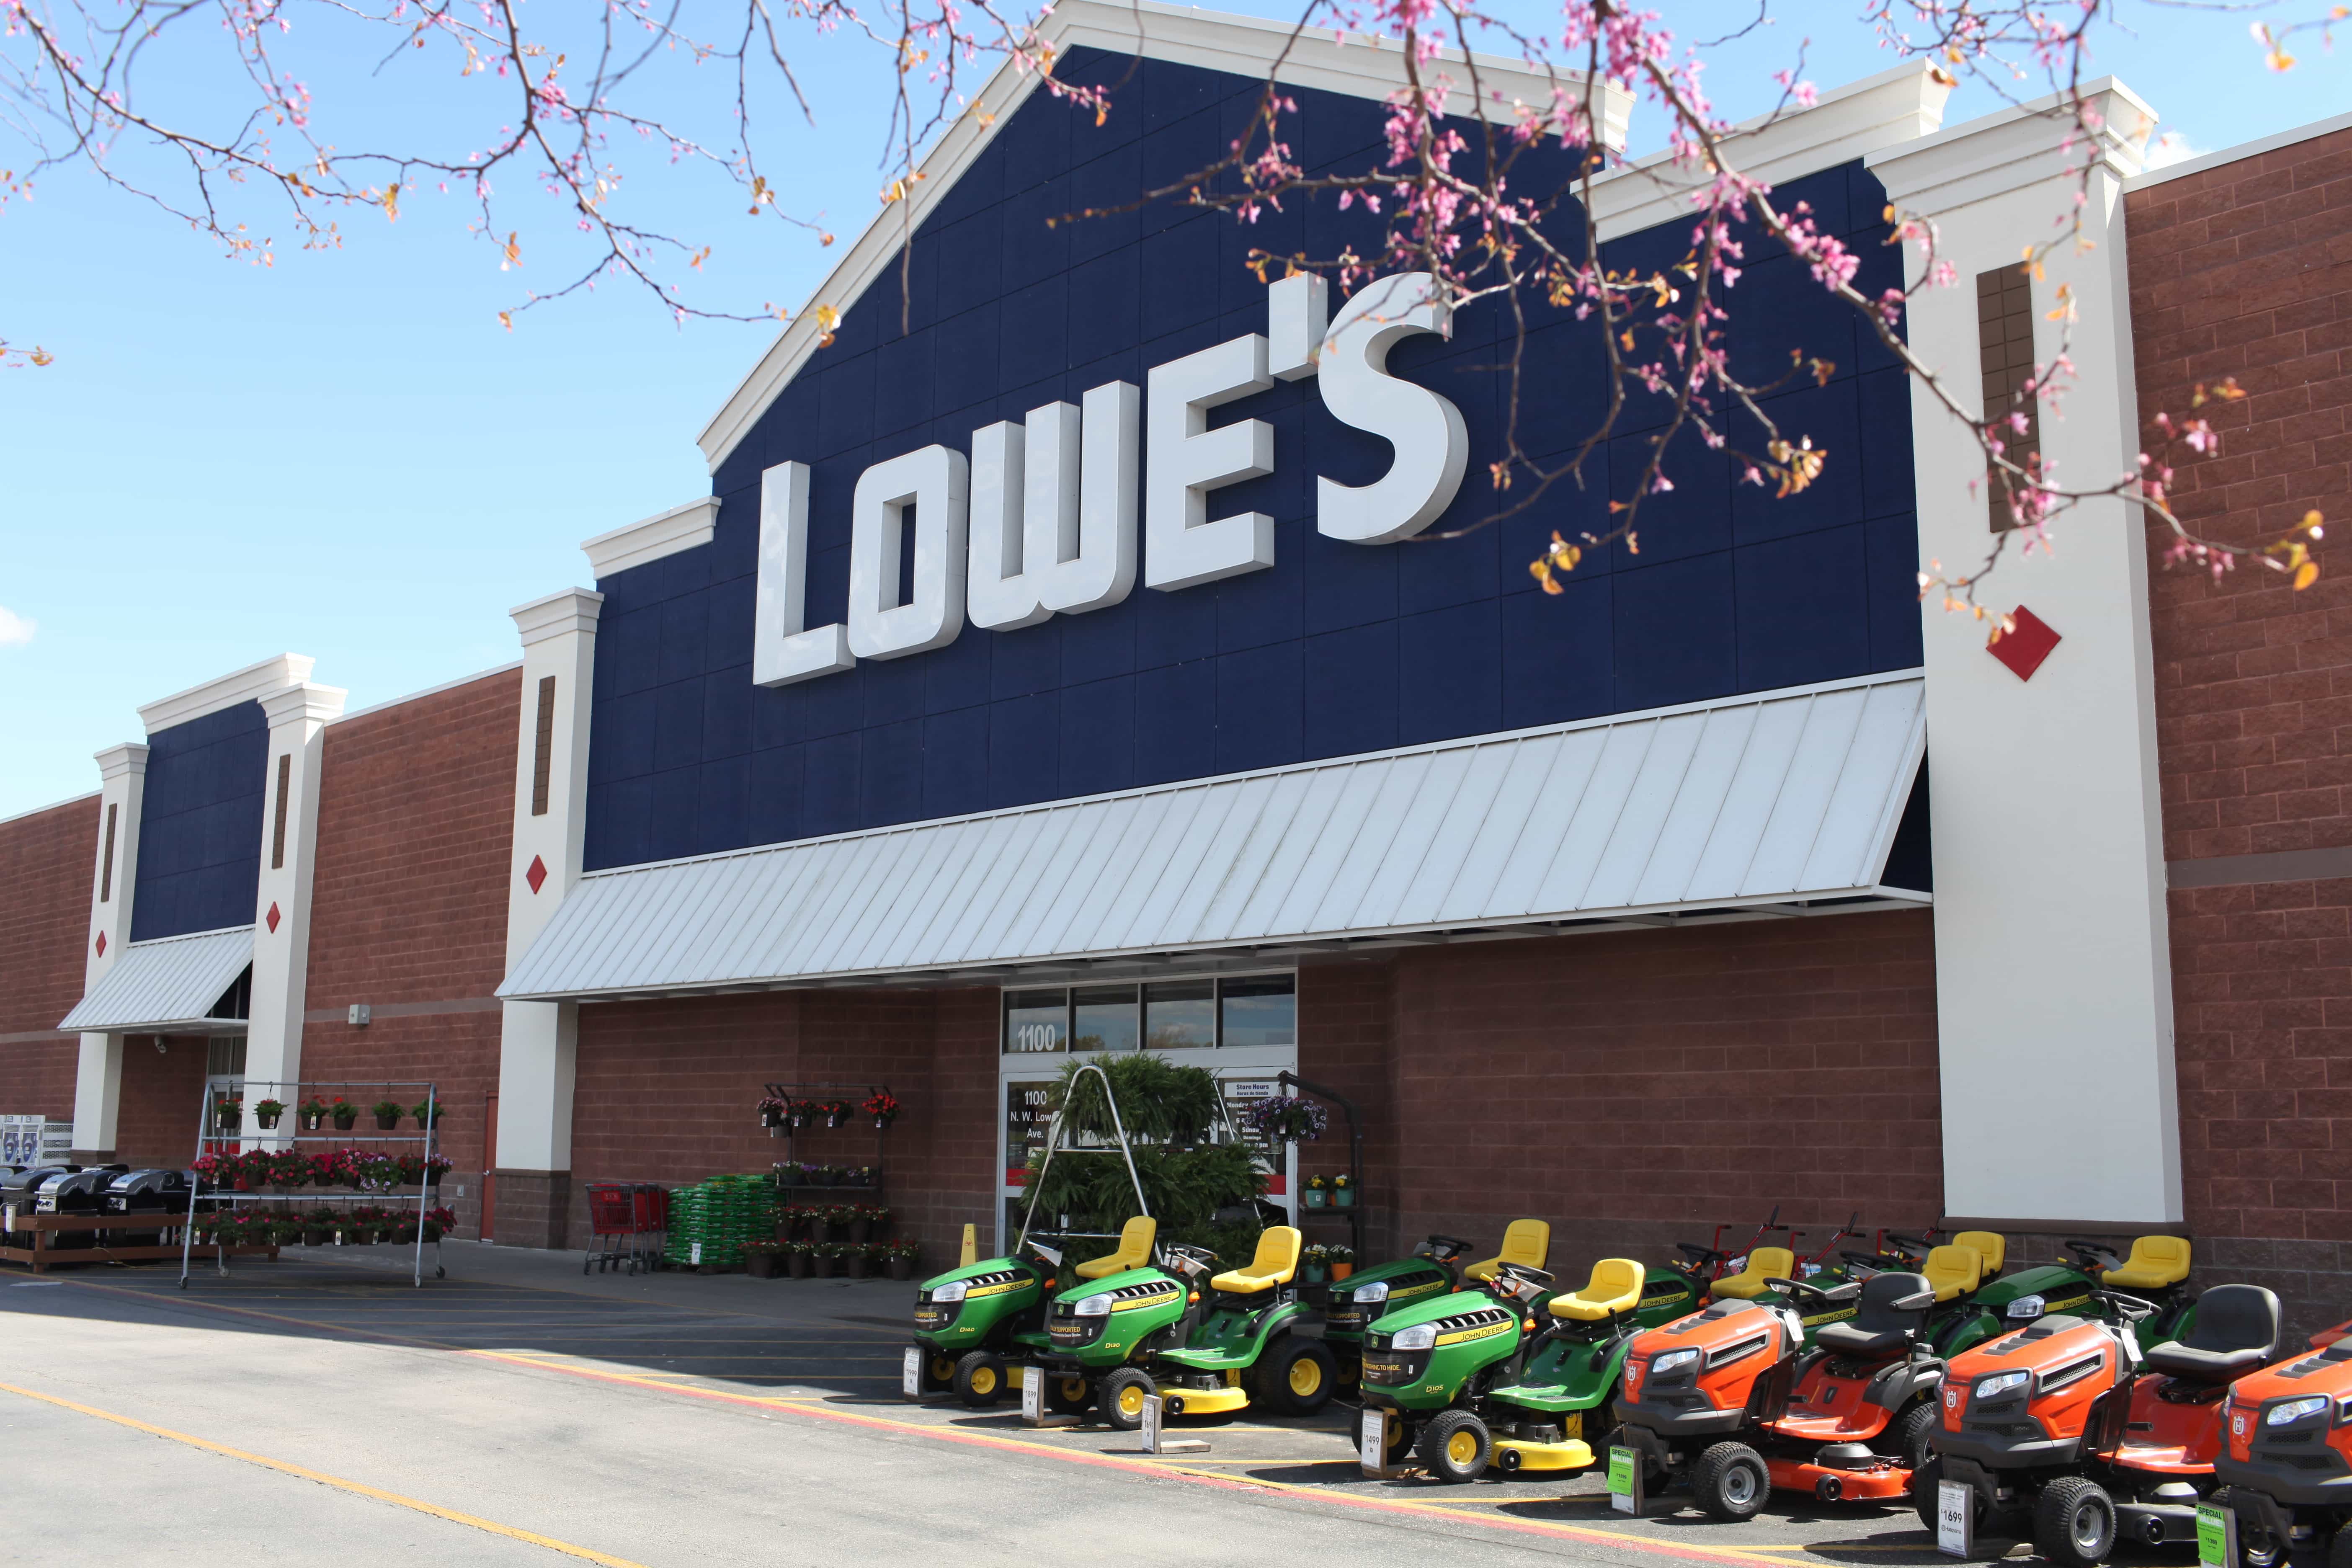 lowes the store